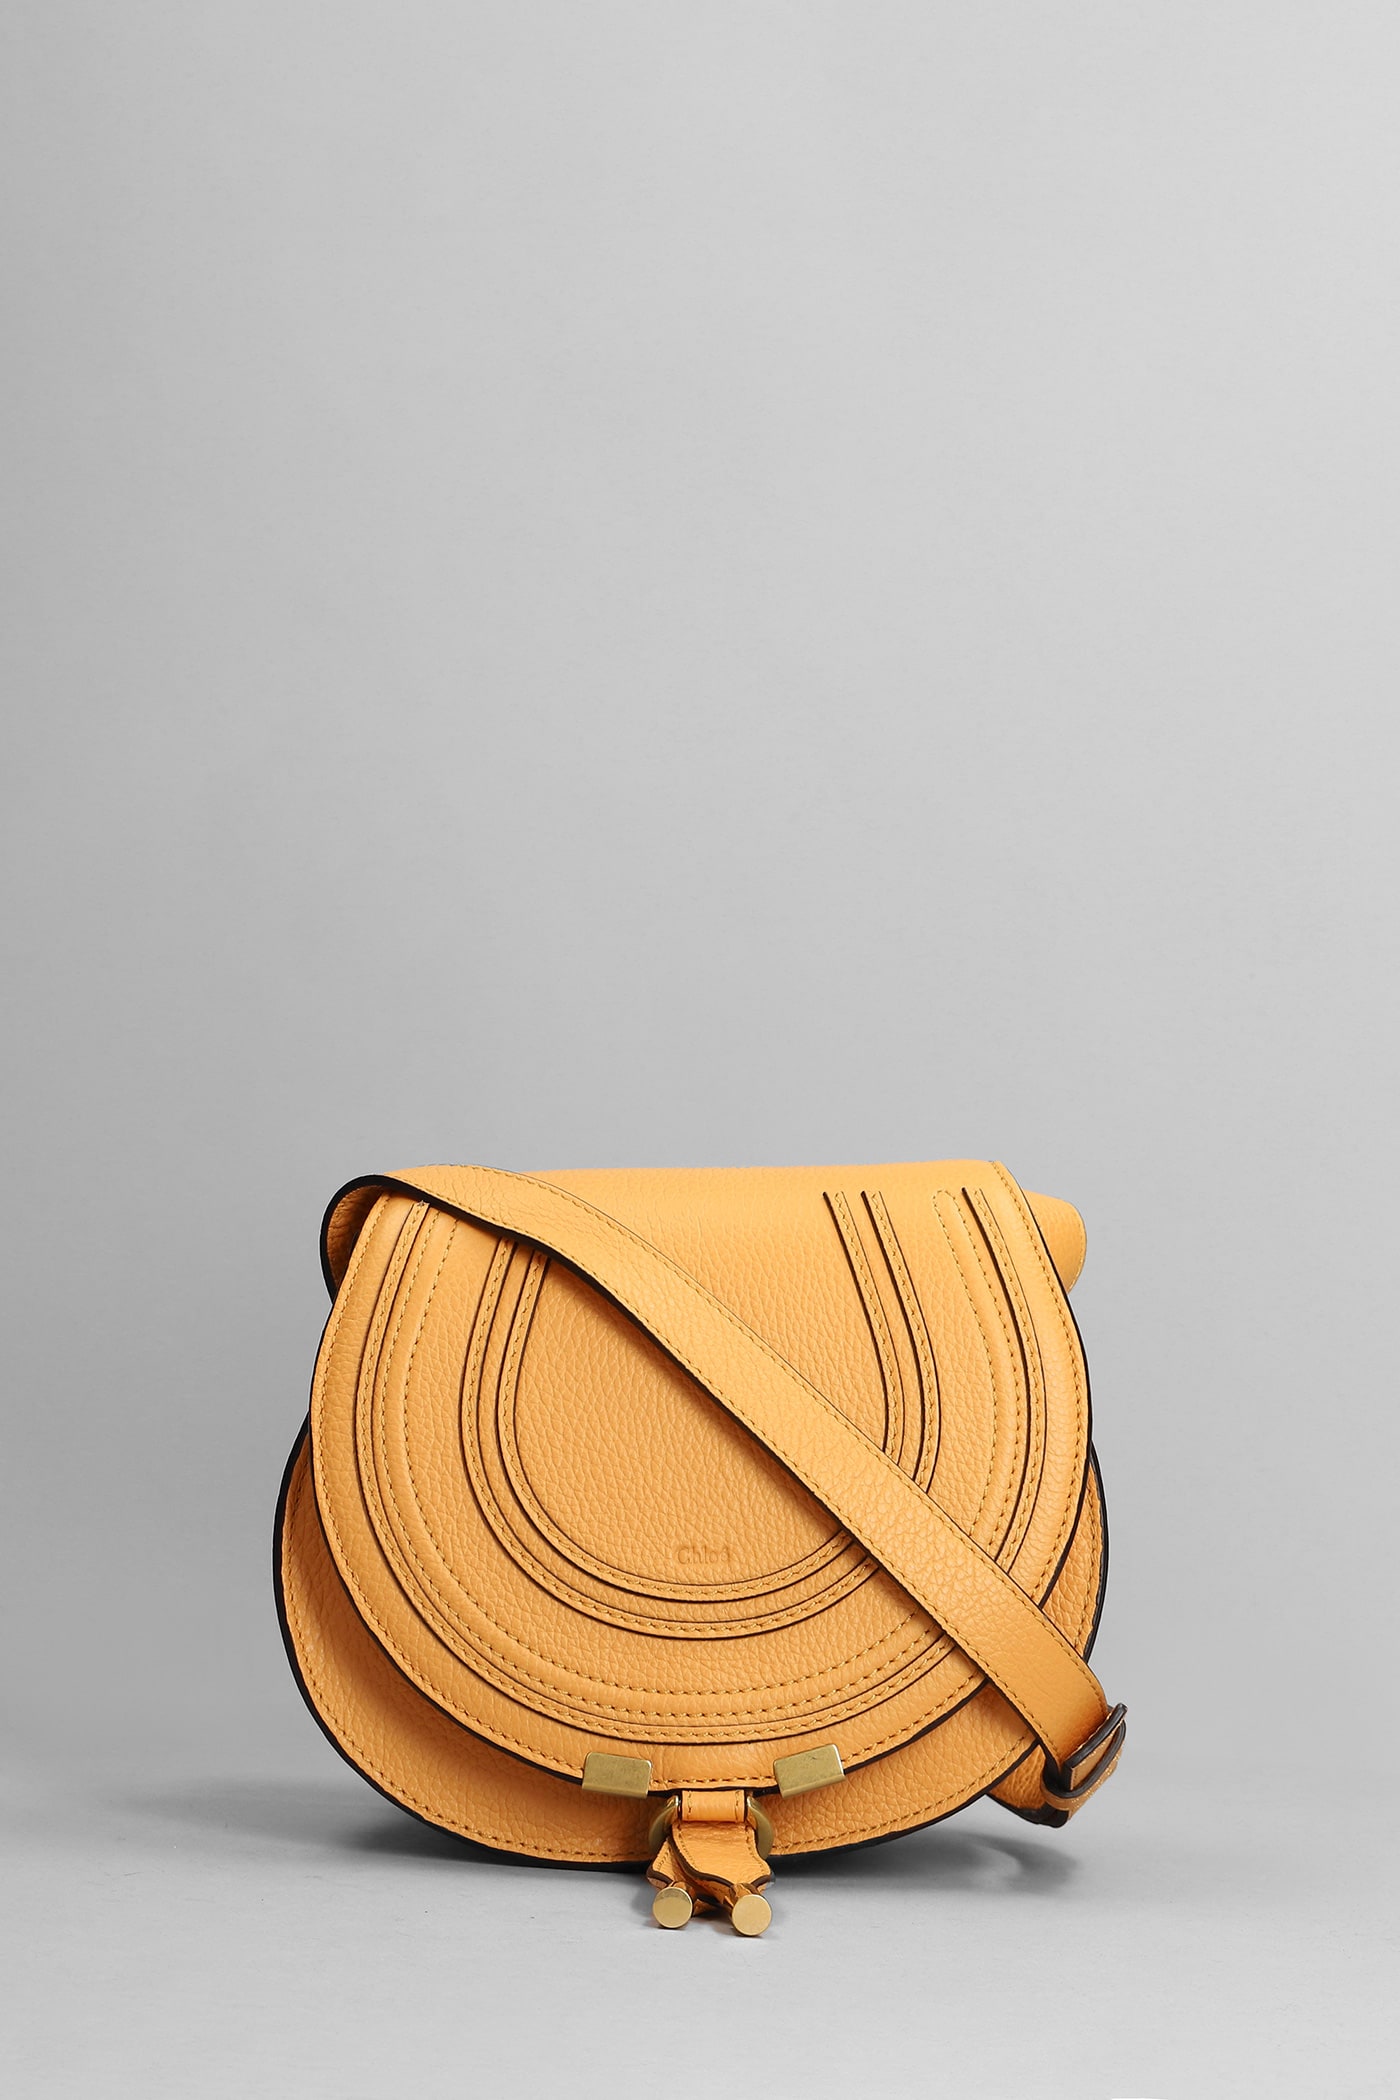 CHLOÉ MINI MARCIE SHOULDER BAG IN YELLOW LEATHER